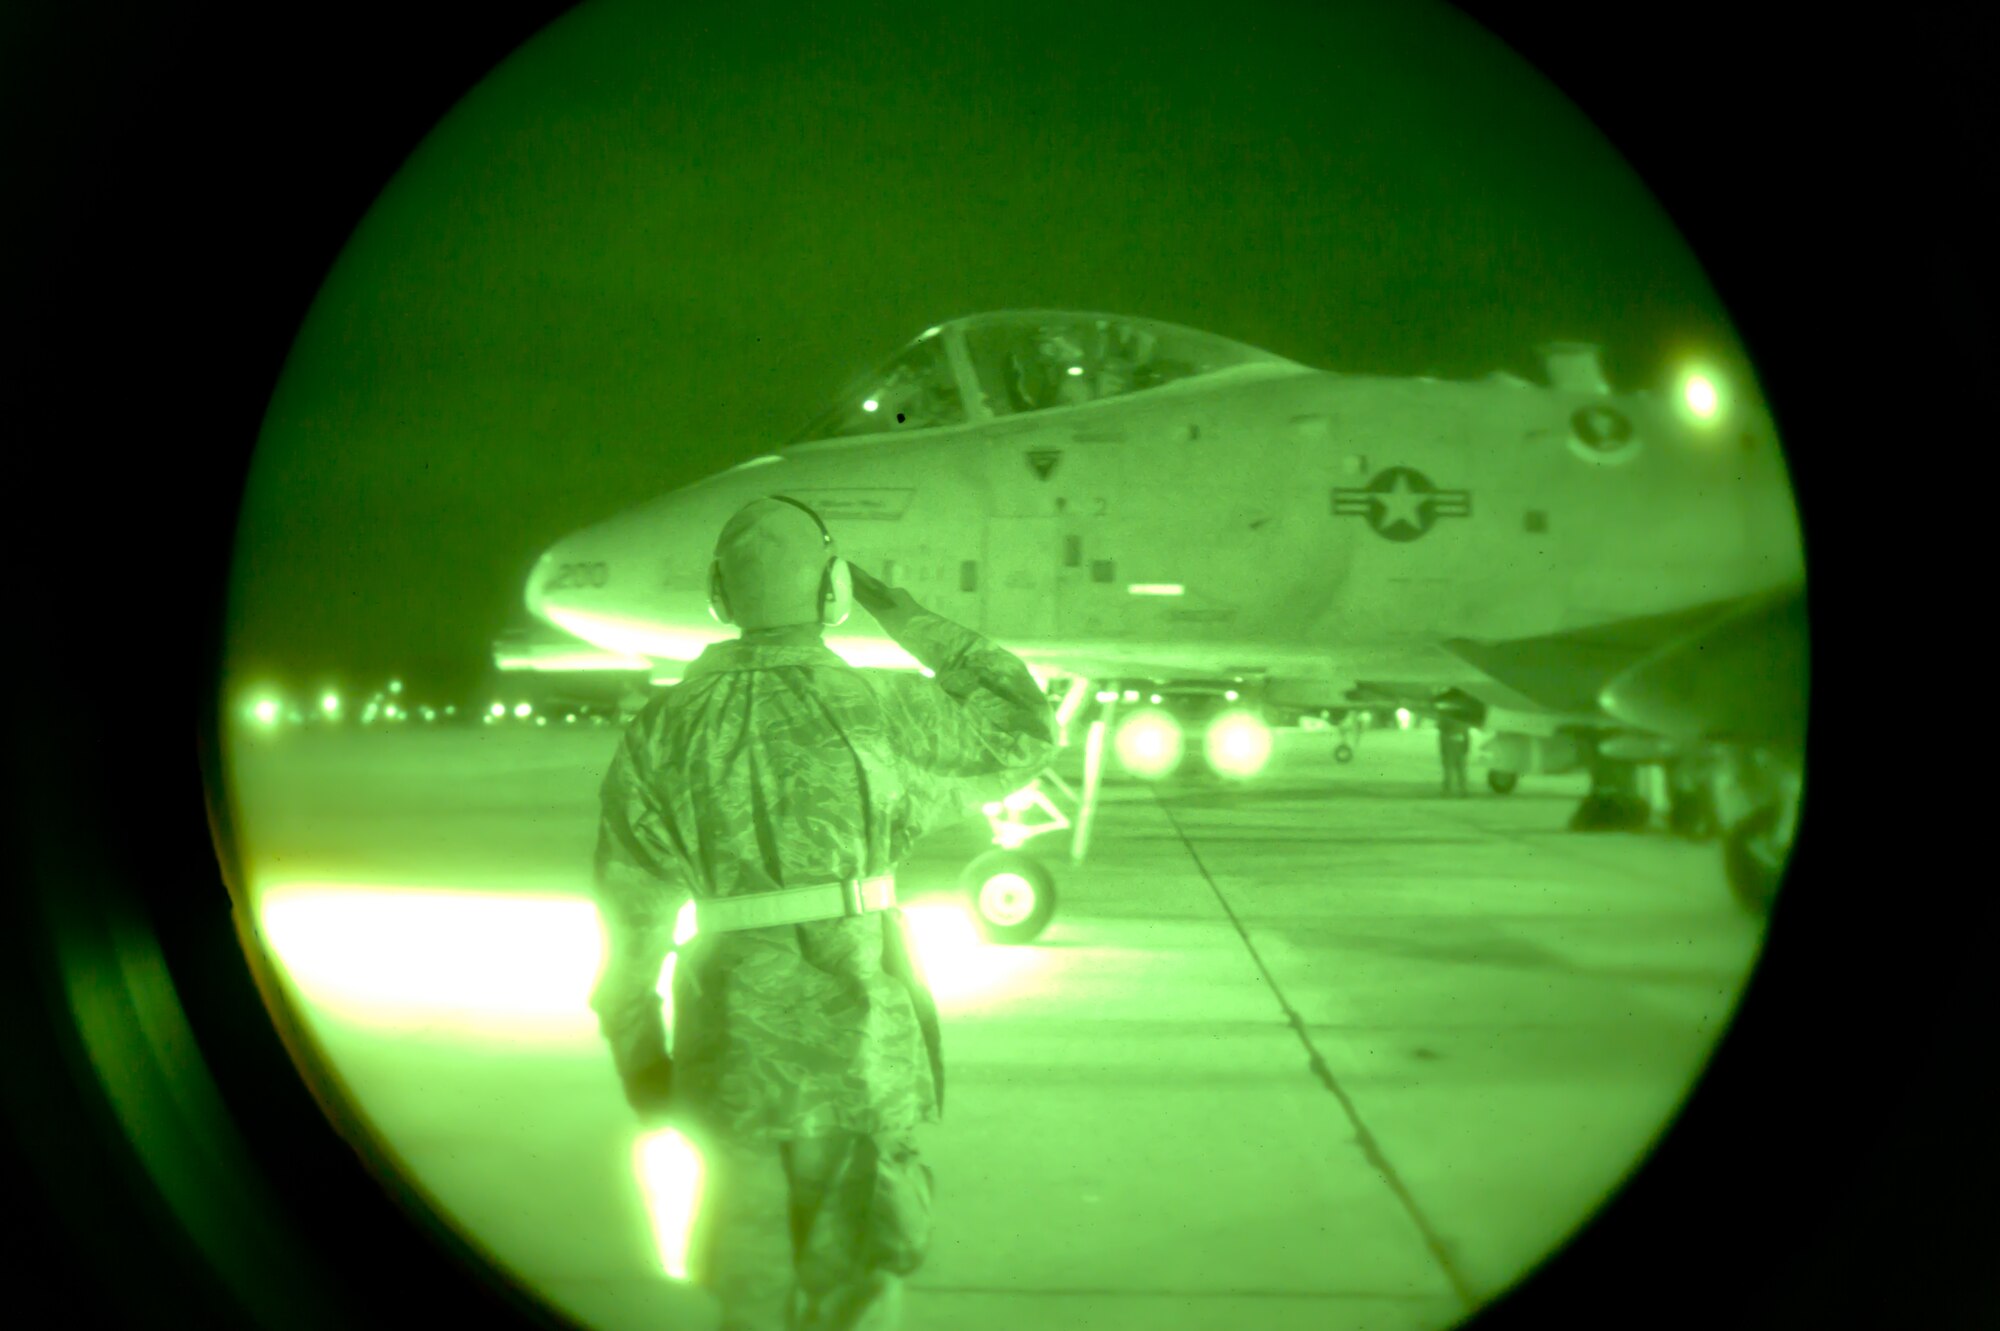 Instructors from the 66th Weapons Squadron (WS), along with students enrolled in the United States Air Force Weapons School, and pilots with the 190th Fighter Squadron (FS) prepare to take off on a night mission in their A-10 Thunderbolt IIs from Gowen Field, Boise, Idaho on November 10. The 66th WS, stationed at Nellis Air Force Base, Nevada, is conducting USAF Weapons School training from Gowen Field, in conjunction with A-10s from the 190th FS, and other agencies and units, providing realistic training opportunities in nearby ranges.  (U.S. Air Force by Staff Sgt. Robert Barney)